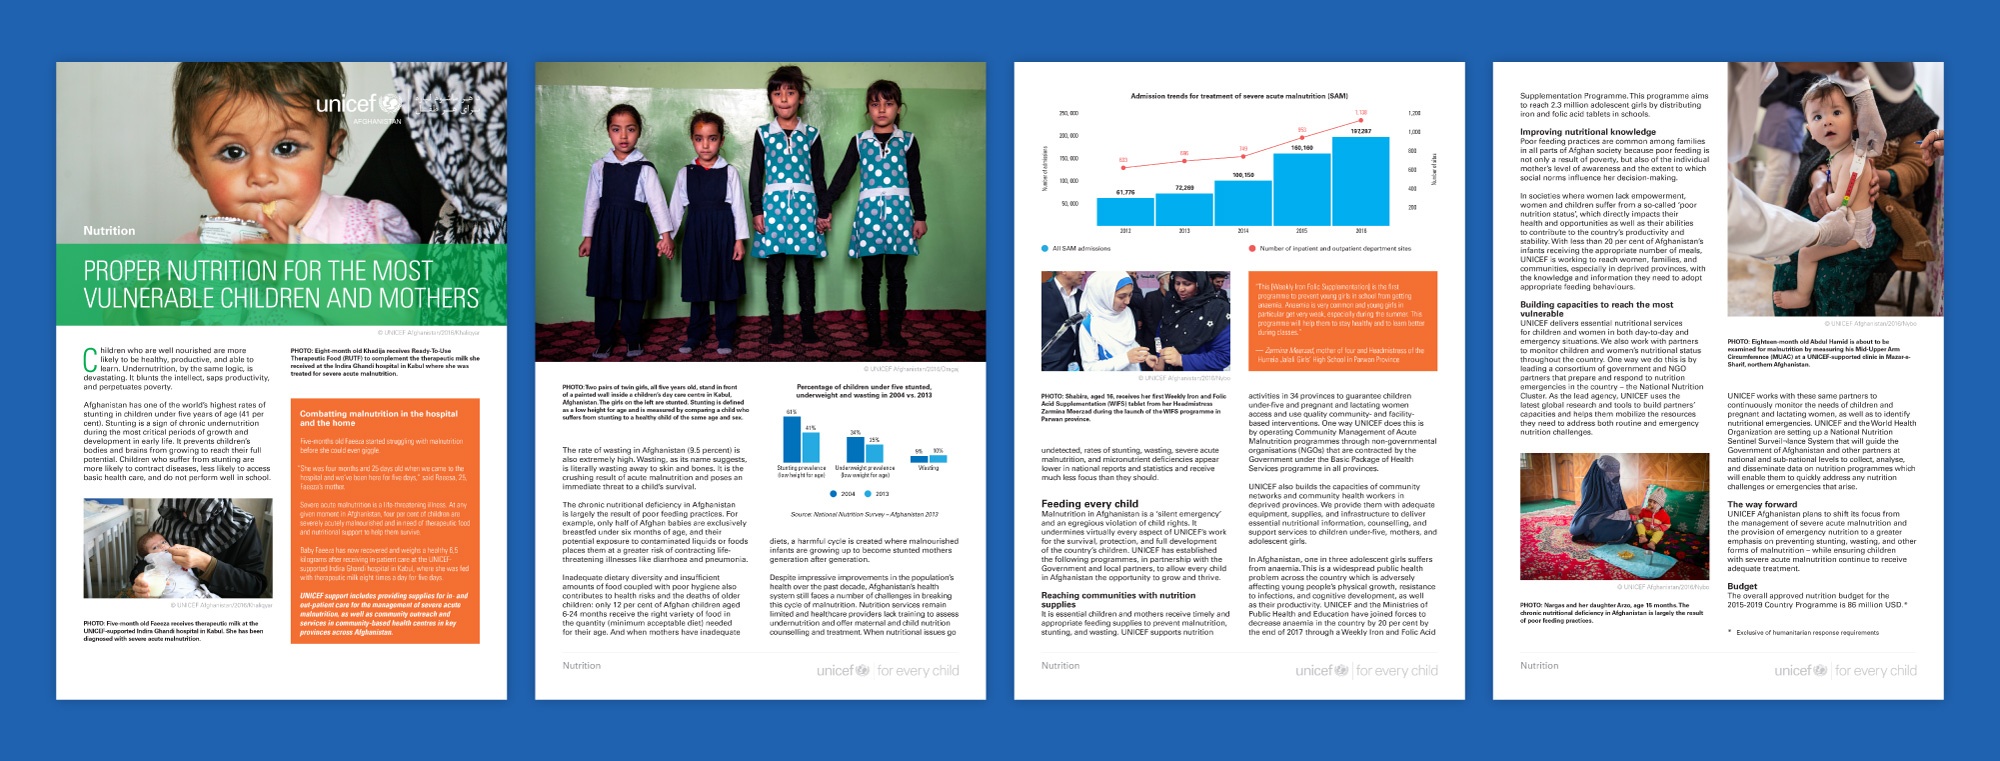 UNICEF Afghanistan Nutrition layout